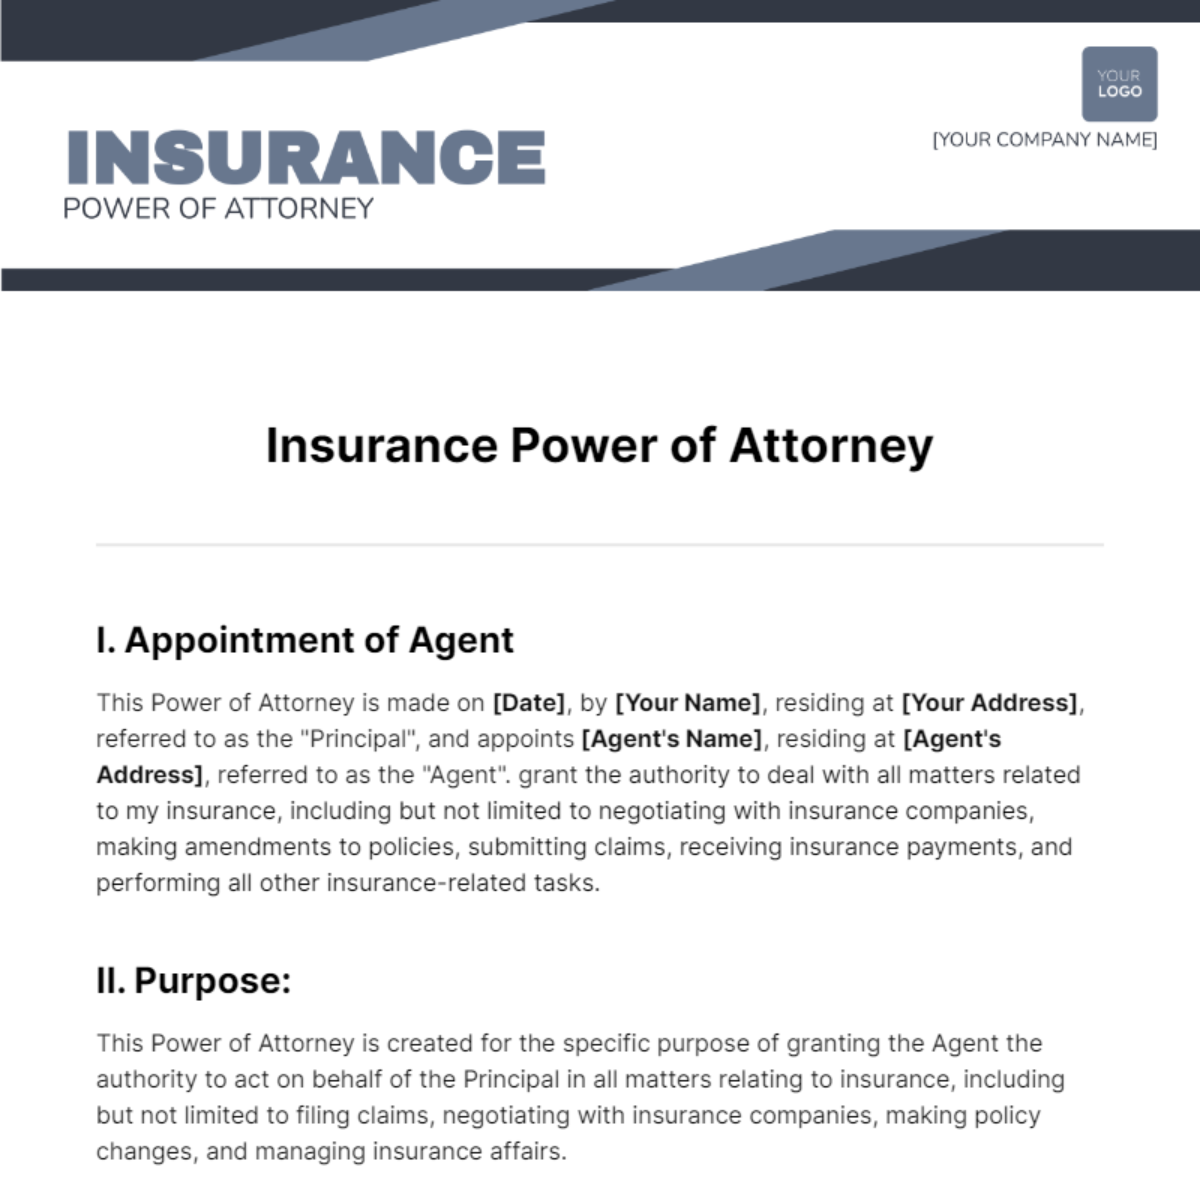 Insurance Power of Attorney Template